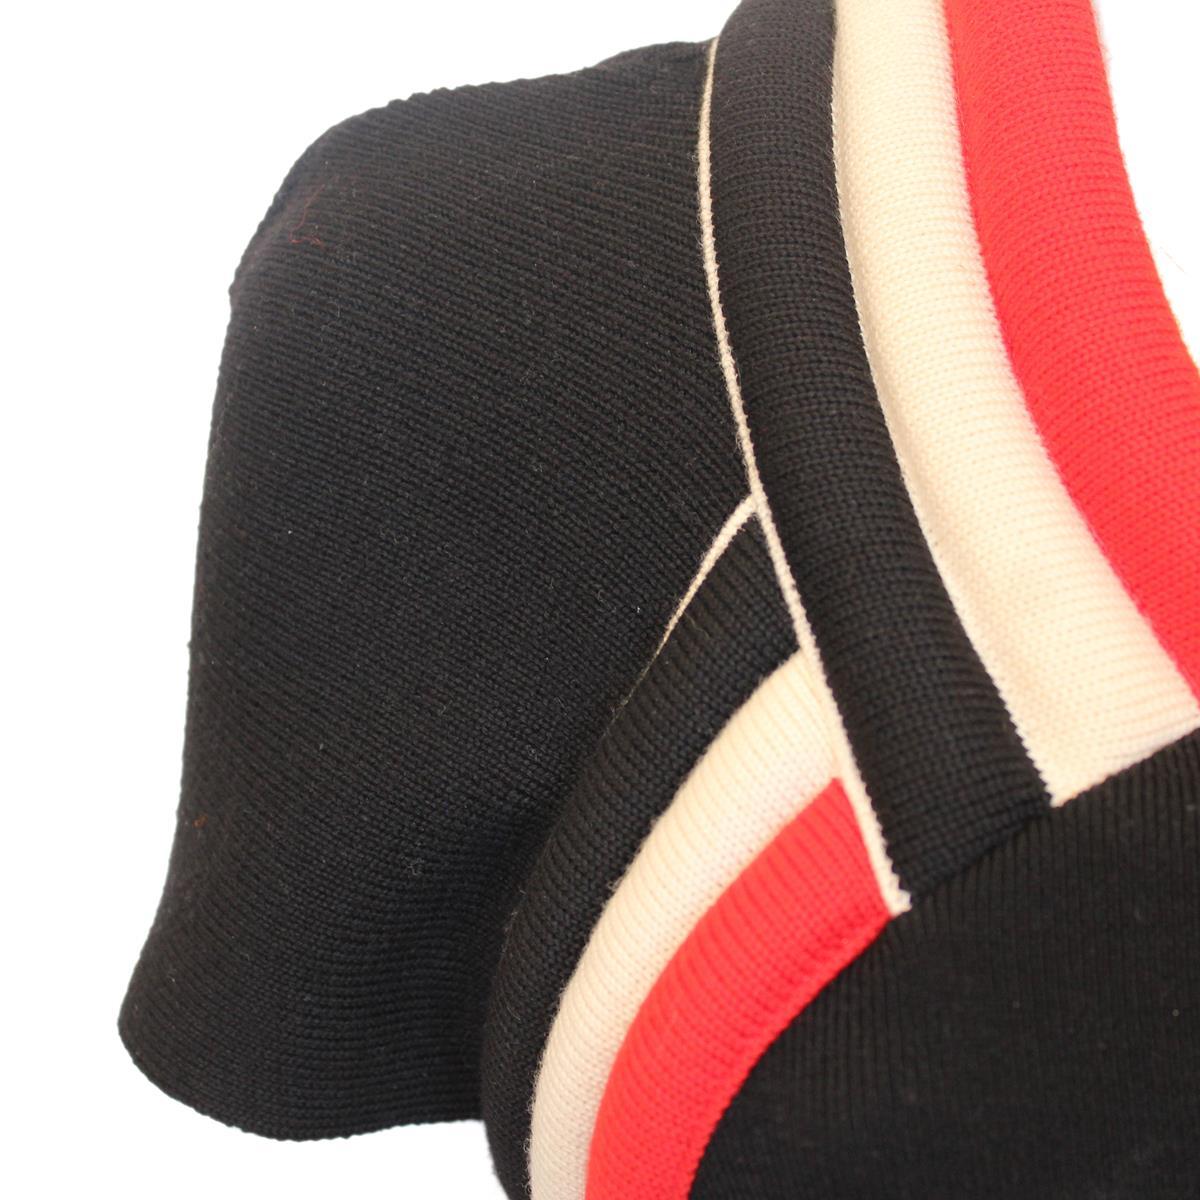 Very chic Balenciaga dress
Wool
Black color
Red and white stripes
Short sleeve
Total lenght (shoulder/hem) cm 90 (35.4 inches)
Shoulder cm 44 (17.3 inches)
French size 38, italian 42
Worldwide express shipping included in the price !